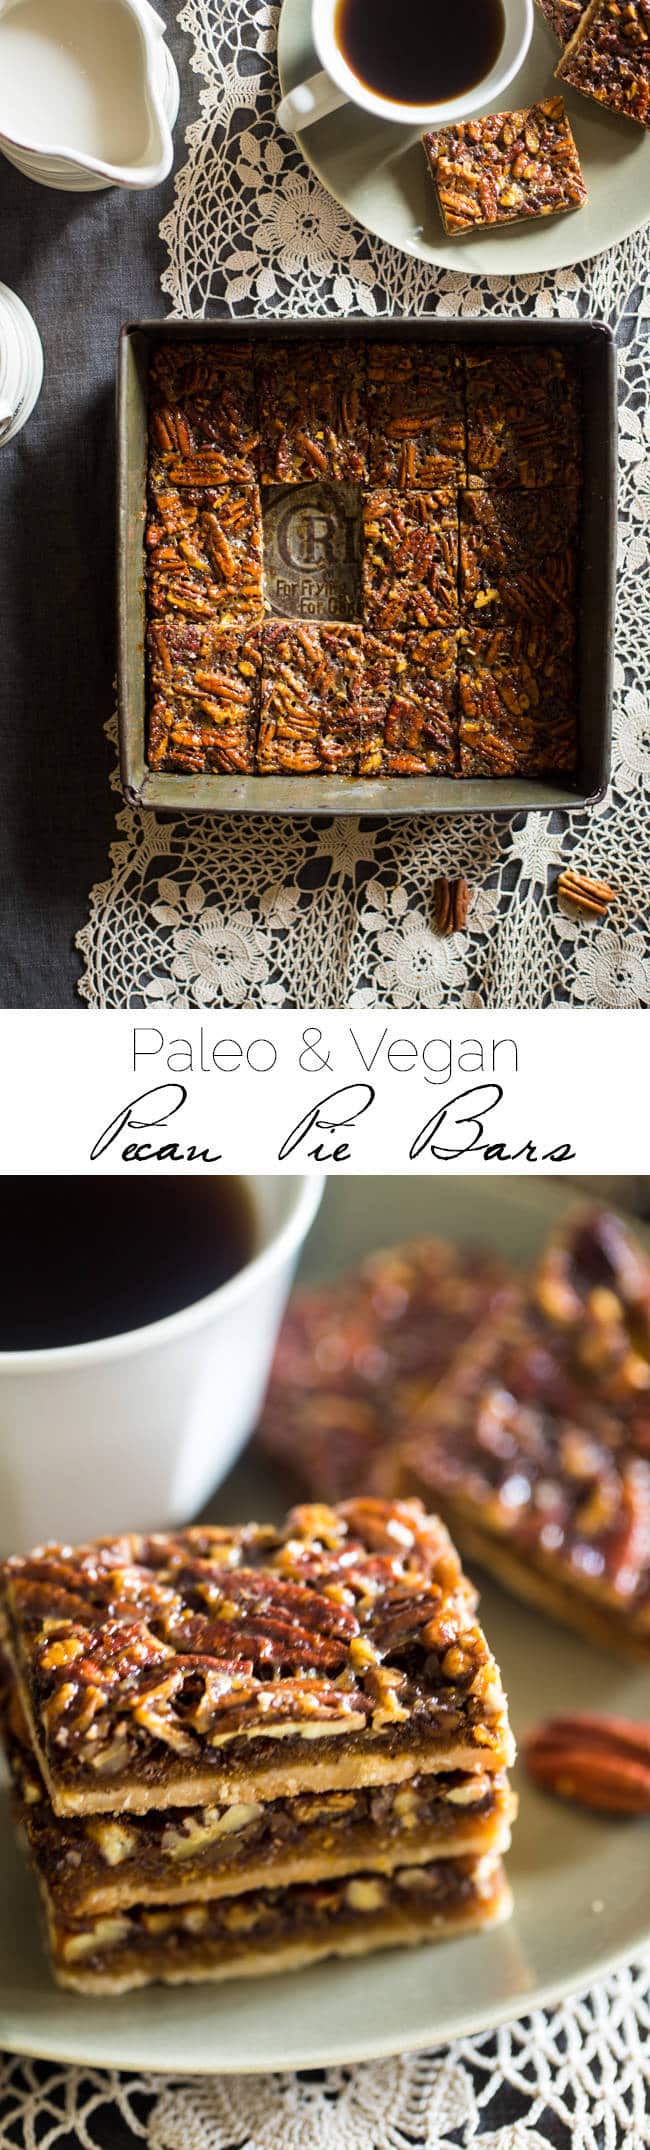 Vegan + Paleo Pecan Pie Bars - These bars are so easy to make and only have 6 ingredients. You would never know they're secretly a healthy, gluten free, and vegan-friendly treat that's perfect for Thanksgiving! | Foodfaithfitness.com | @FoodFaithFit